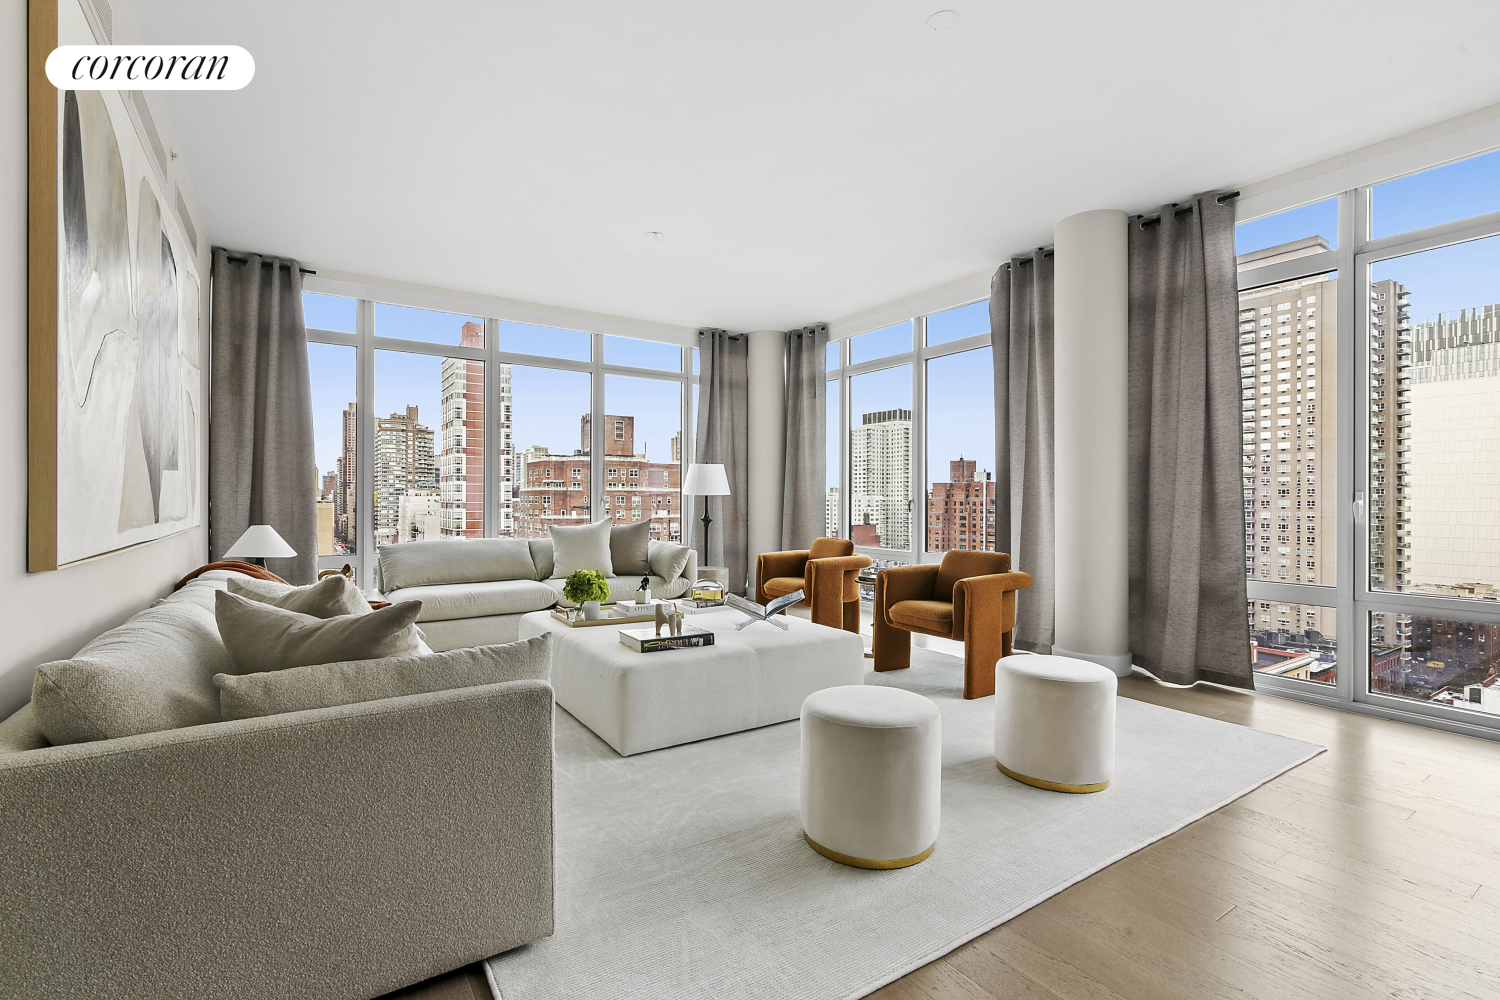 1355 1st Avenue 15, Lenox Hill, Upper East Side, NYC - 4 Bedrooms  
4 Bathrooms  
7 Rooms - 